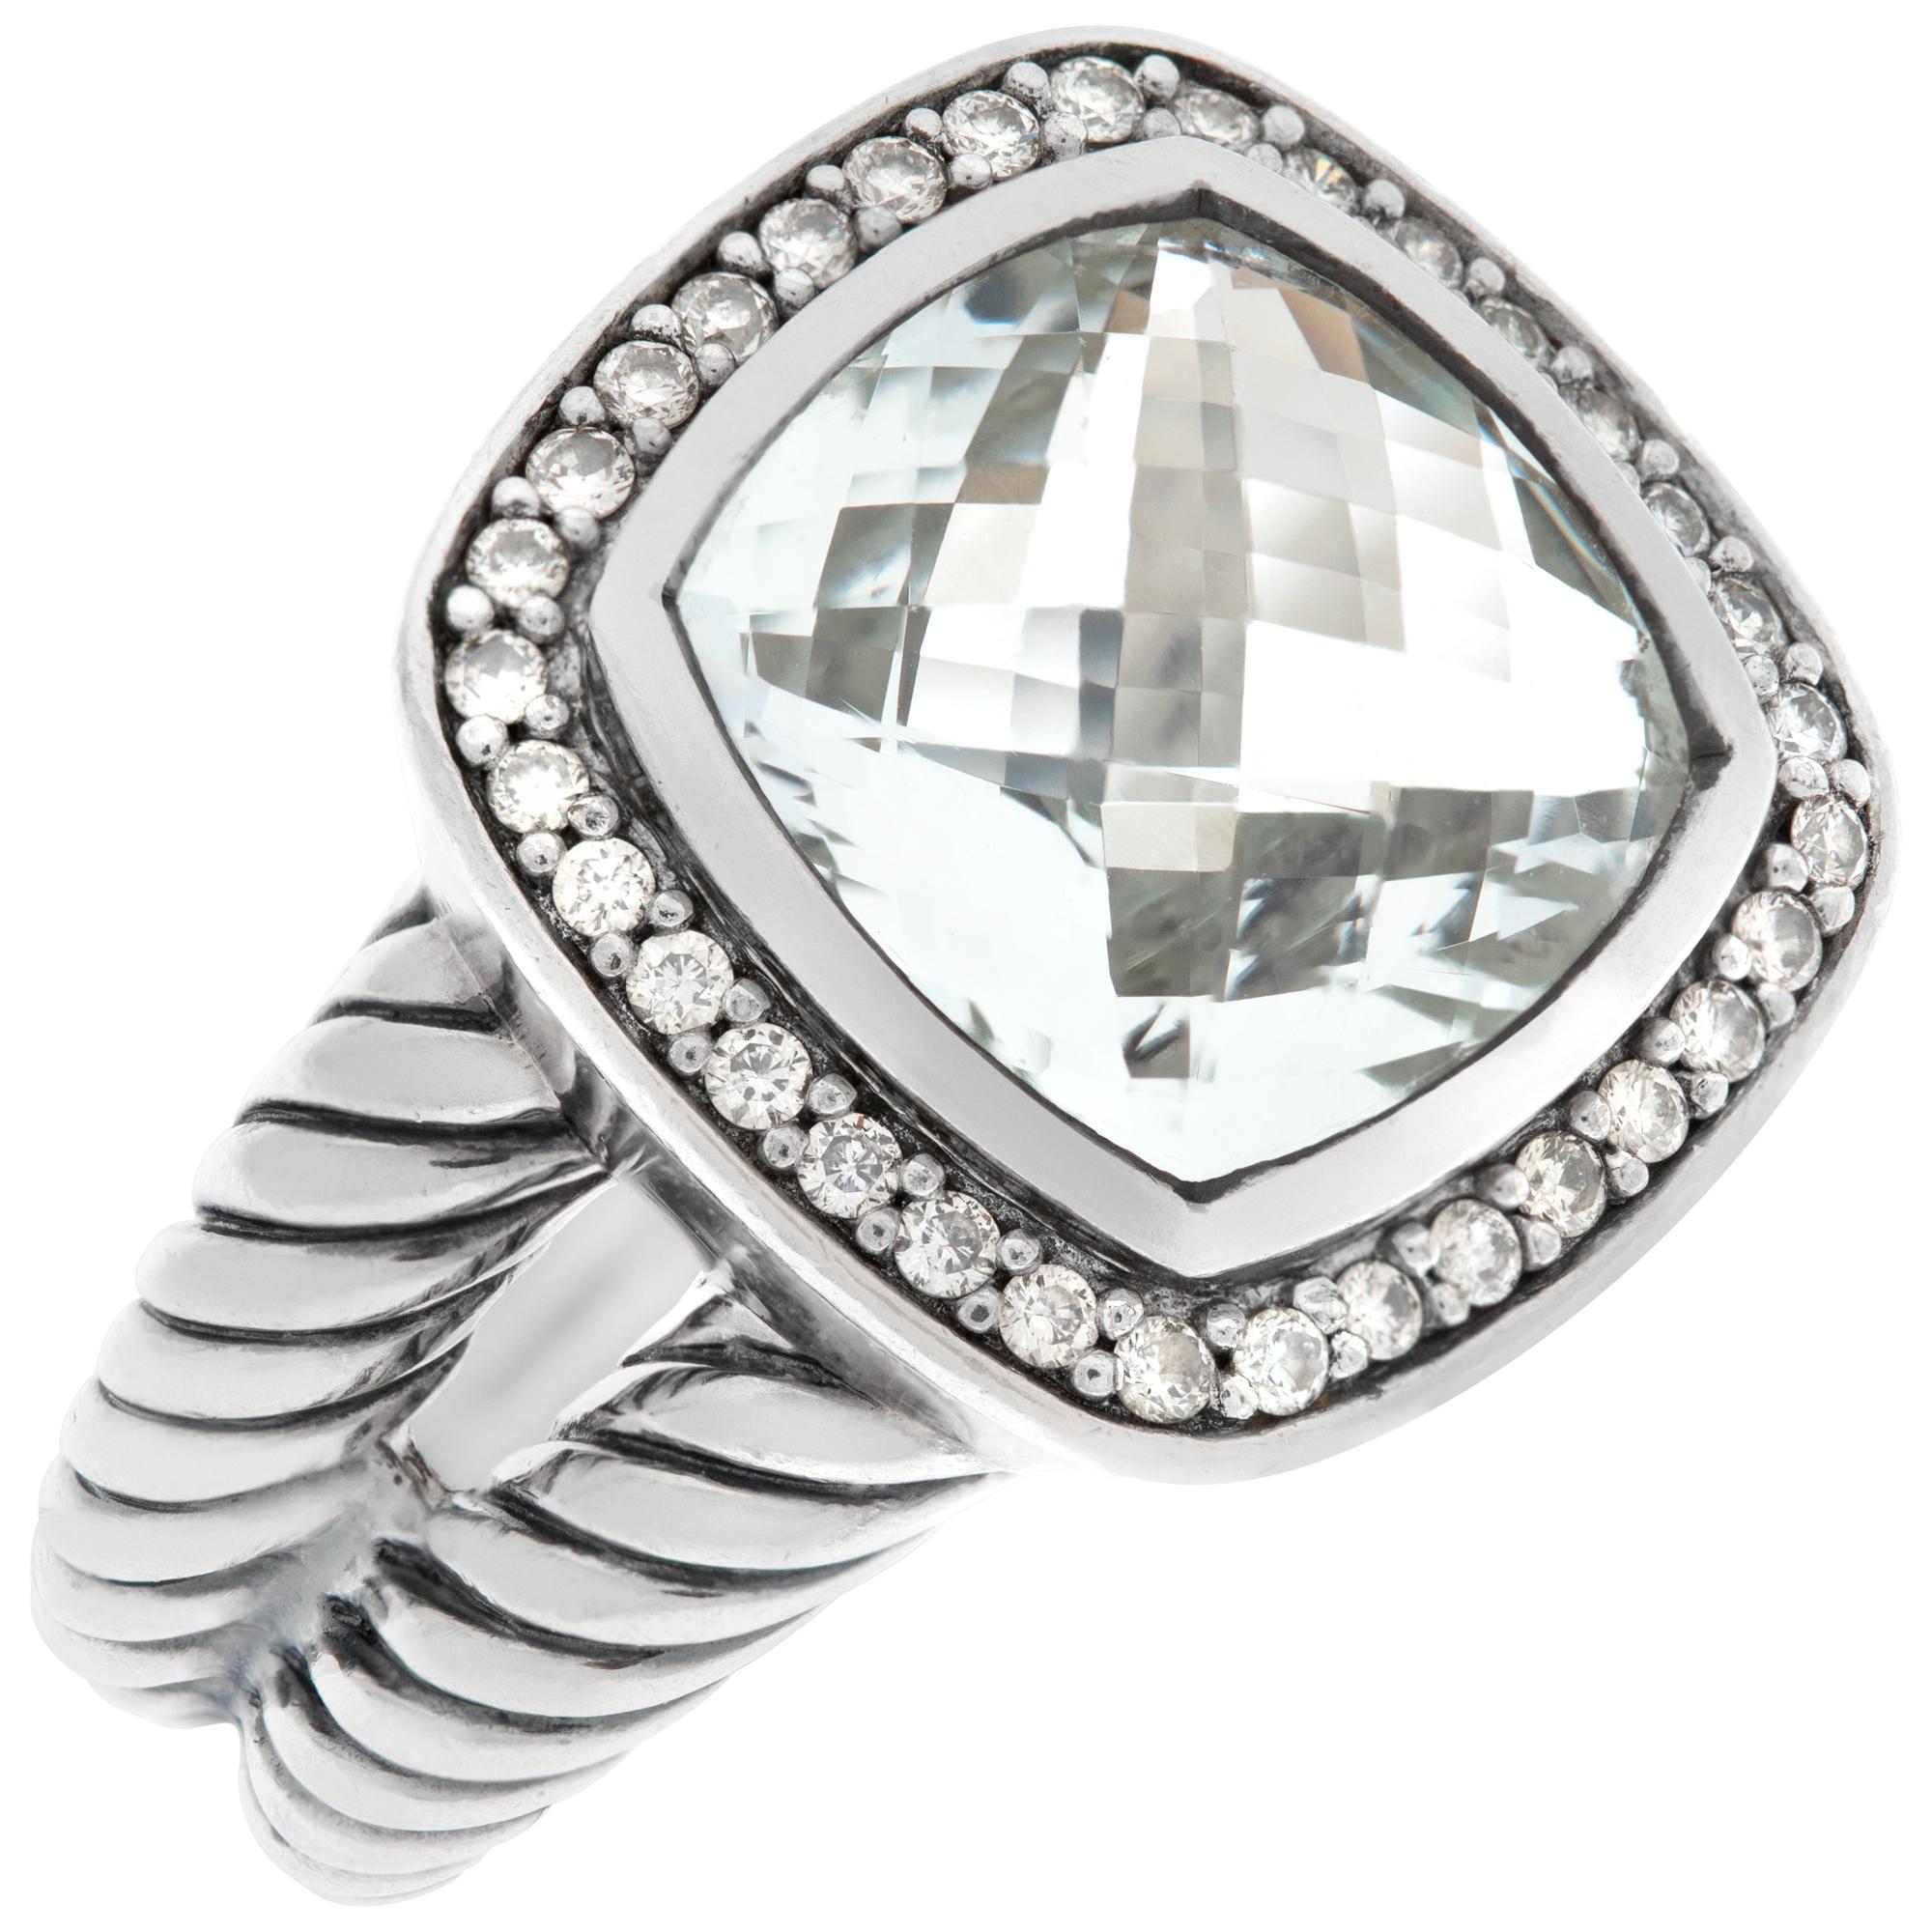 David Yurman Albion Prasiolite Sterling Silver Ring. In Excellent Condition For Sale In Surfside, FL